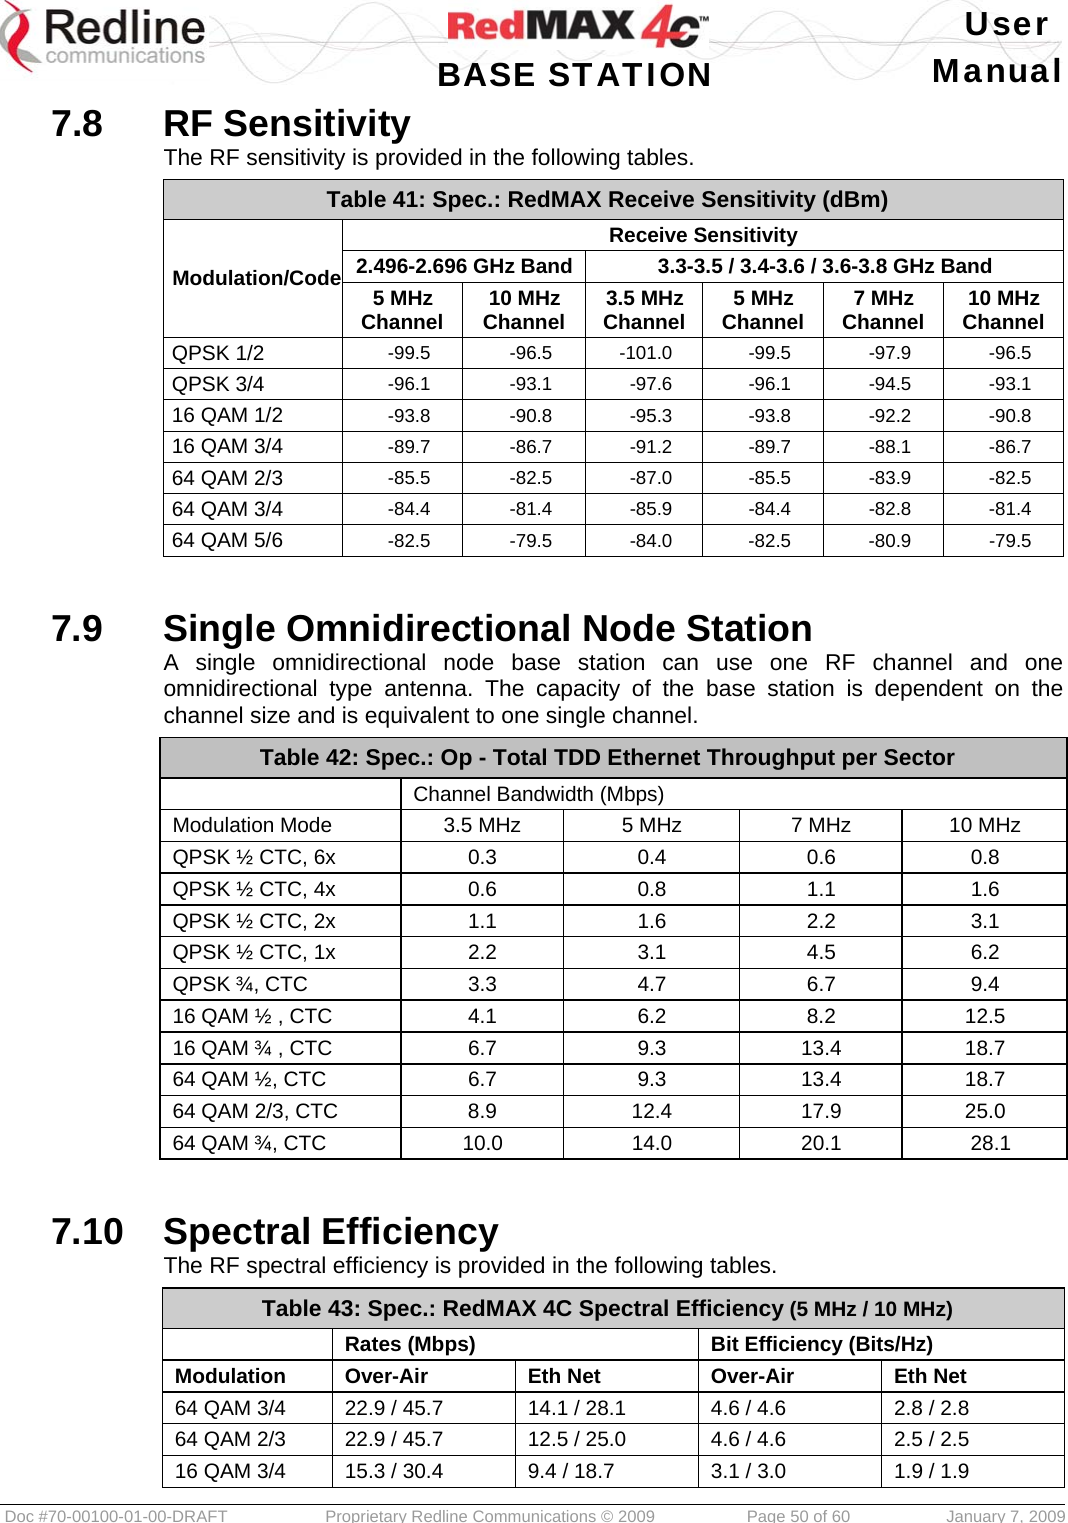   User  BASE STATION Manual  Doc #70-00100-01-00-DRAFT  Proprietary Redline Communications © 2009   Page 50 of 60  January 7, 2009 7.8  RF Sensitivity The RF sensitivity is provided in the following tables. Table 41: Spec.: RedMAX Receive Sensitivity (dBm) Modulation/Code Receive Sensitivity 2.496-2.696 GHz Band  3.3-3.5 / 3.4-3.6 / 3.6-3.8 GHz Band 5 MHz Channel  10 MHz Channel  3.5 MHz Channel  5 MHz Channel  7 MHz Channel  10 MHz Channel QPSK 1/2  -99.5 -96.5 -101.0 -99.5 -97.9 -96.5 QPSK 3/4  -96.1 -93.1 -97.6 -96.1 -94.5 -93.1 16 QAM 1/2  -93.8 -90.8 -95.3 -93.8 -92.2 -90.8 16 QAM 3/4  -89.7 -86.7 -91.2 -89.7 -88.1 -86.7 64 QAM 2/3  -85.5 -82.5 -87.0 -85.5 -83.9 -82.5 64 QAM 3/4  -84.4 -81.4 -85.9 -84.4 -82.8 -81.4 64 QAM 5/6  -82.5 -79.5 -84.0 -82.5 -80.9 -79.5   7.9  Single Omnidirectional Node Station A single omnidirectional node base station can use one RF channel and one omnidirectional type antenna. The capacity of the base station is dependent on the channel size and is equivalent to one single channel. Table 42: Spec.: Op - Total TDD Ethernet Throughput per Sector   Channel Bandwidth (Mbps) Modulation Mode  3.5 MHz  5 MHz  7 MHz  10 MHz QPSK ½ CTC, 6x  0.3  0.4  0.6  0.8 QPSK ½ CTC, 4x  0.6  0.8  1.1  1.6 QPSK ½ CTC, 2x  1.1  1.6  2.2  3.1 QPSK ½ CTC, 1x  2.2  3.1  4.5  6.2 QPSK ¾, CTC  3.3  4.7  6.7  9.4 16 QAM ½ , CTC  4.1  6.2  8.2  12.5 16 QAM ¾ , CTC  6.7  9.3  13.4  18.7 64 QAM ½, CTC  6.7  9.3  13.4  18.7 64 QAM 2/3, CTC   8.9  12.4  17.9  25.0 64 QAM ¾, CTC  10.0  14.0  20.1  28.1   7.10  Spectral Efficiency The RF spectral efficiency is provided in the following tables. Table 43: Spec.: RedMAX 4C Spectral Efficiency (5 MHz / 10 MHz)  Rates (Mbps) Bit Efficiency (Bits/Hz) Modulation Over-Air  Eth Net  Over-Air  Eth Net 64 QAM 3/4  22.9 / 45.7  14.1 / 28.1  4.6 / 4.6  2.8 / 2.8 64 QAM 2/3  22.9 / 45.7  12.5 / 25.0  4.6 / 4.6  2.5 / 2.5 16 QAM 3/4  15.3 / 30.4  9.4 / 18.7  3.1 / 3.0  1.9 / 1.9 